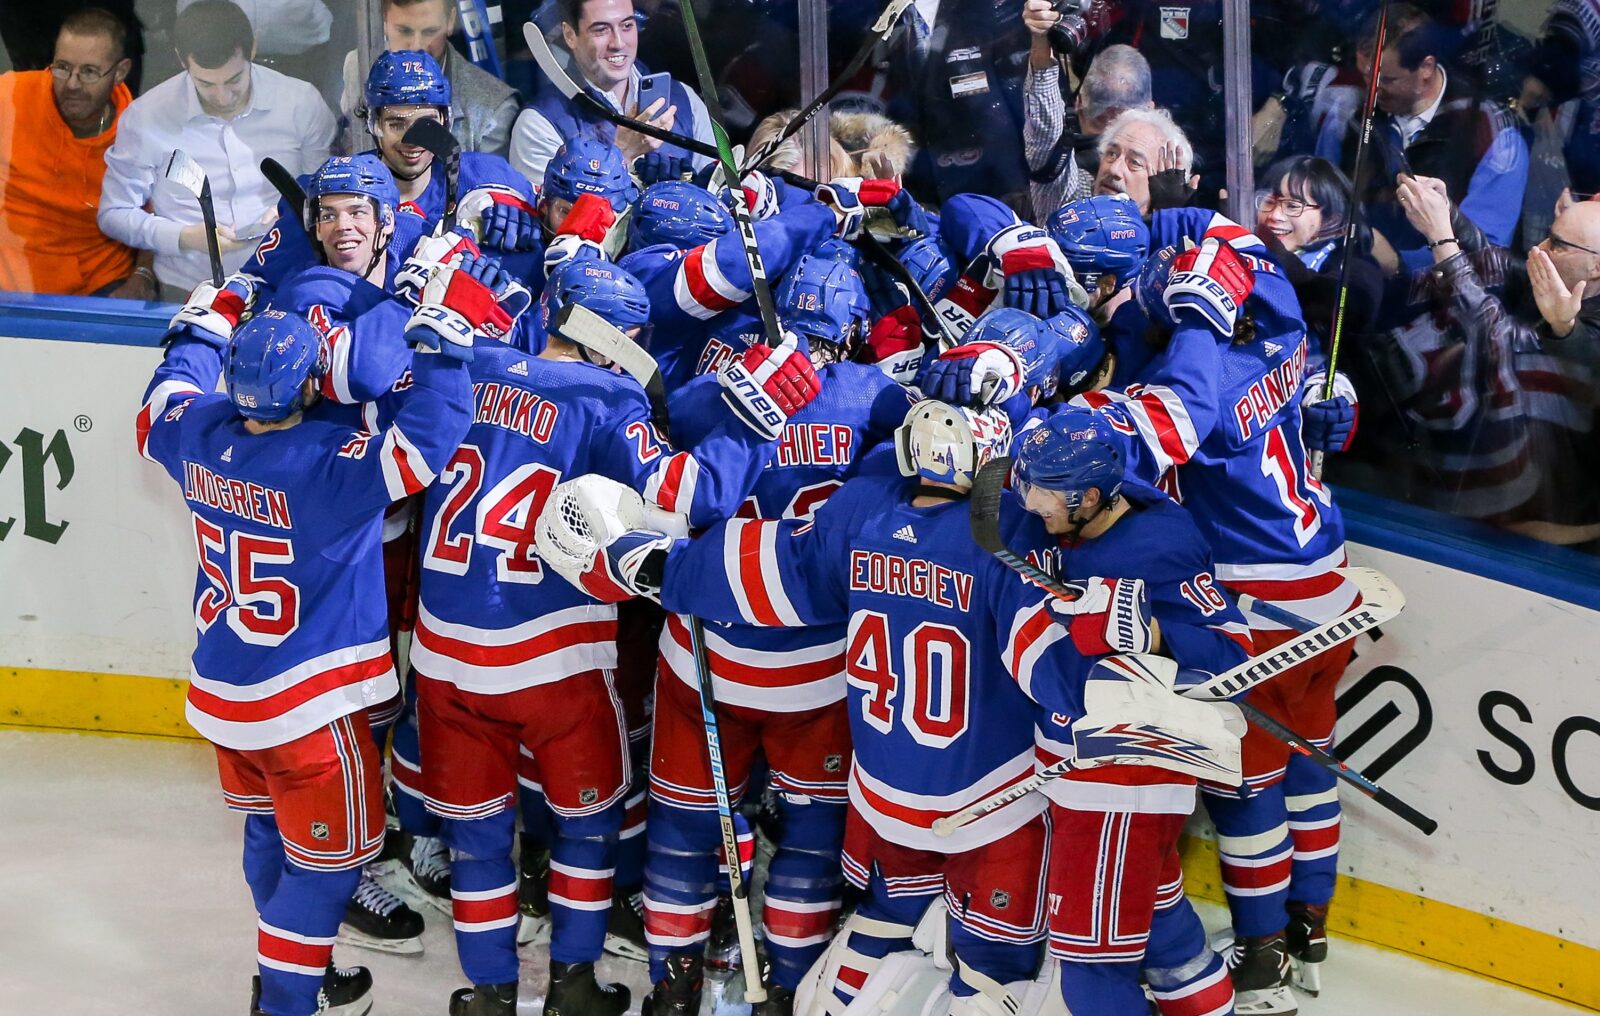 Despite losses, the Rangers are showing their best process of the